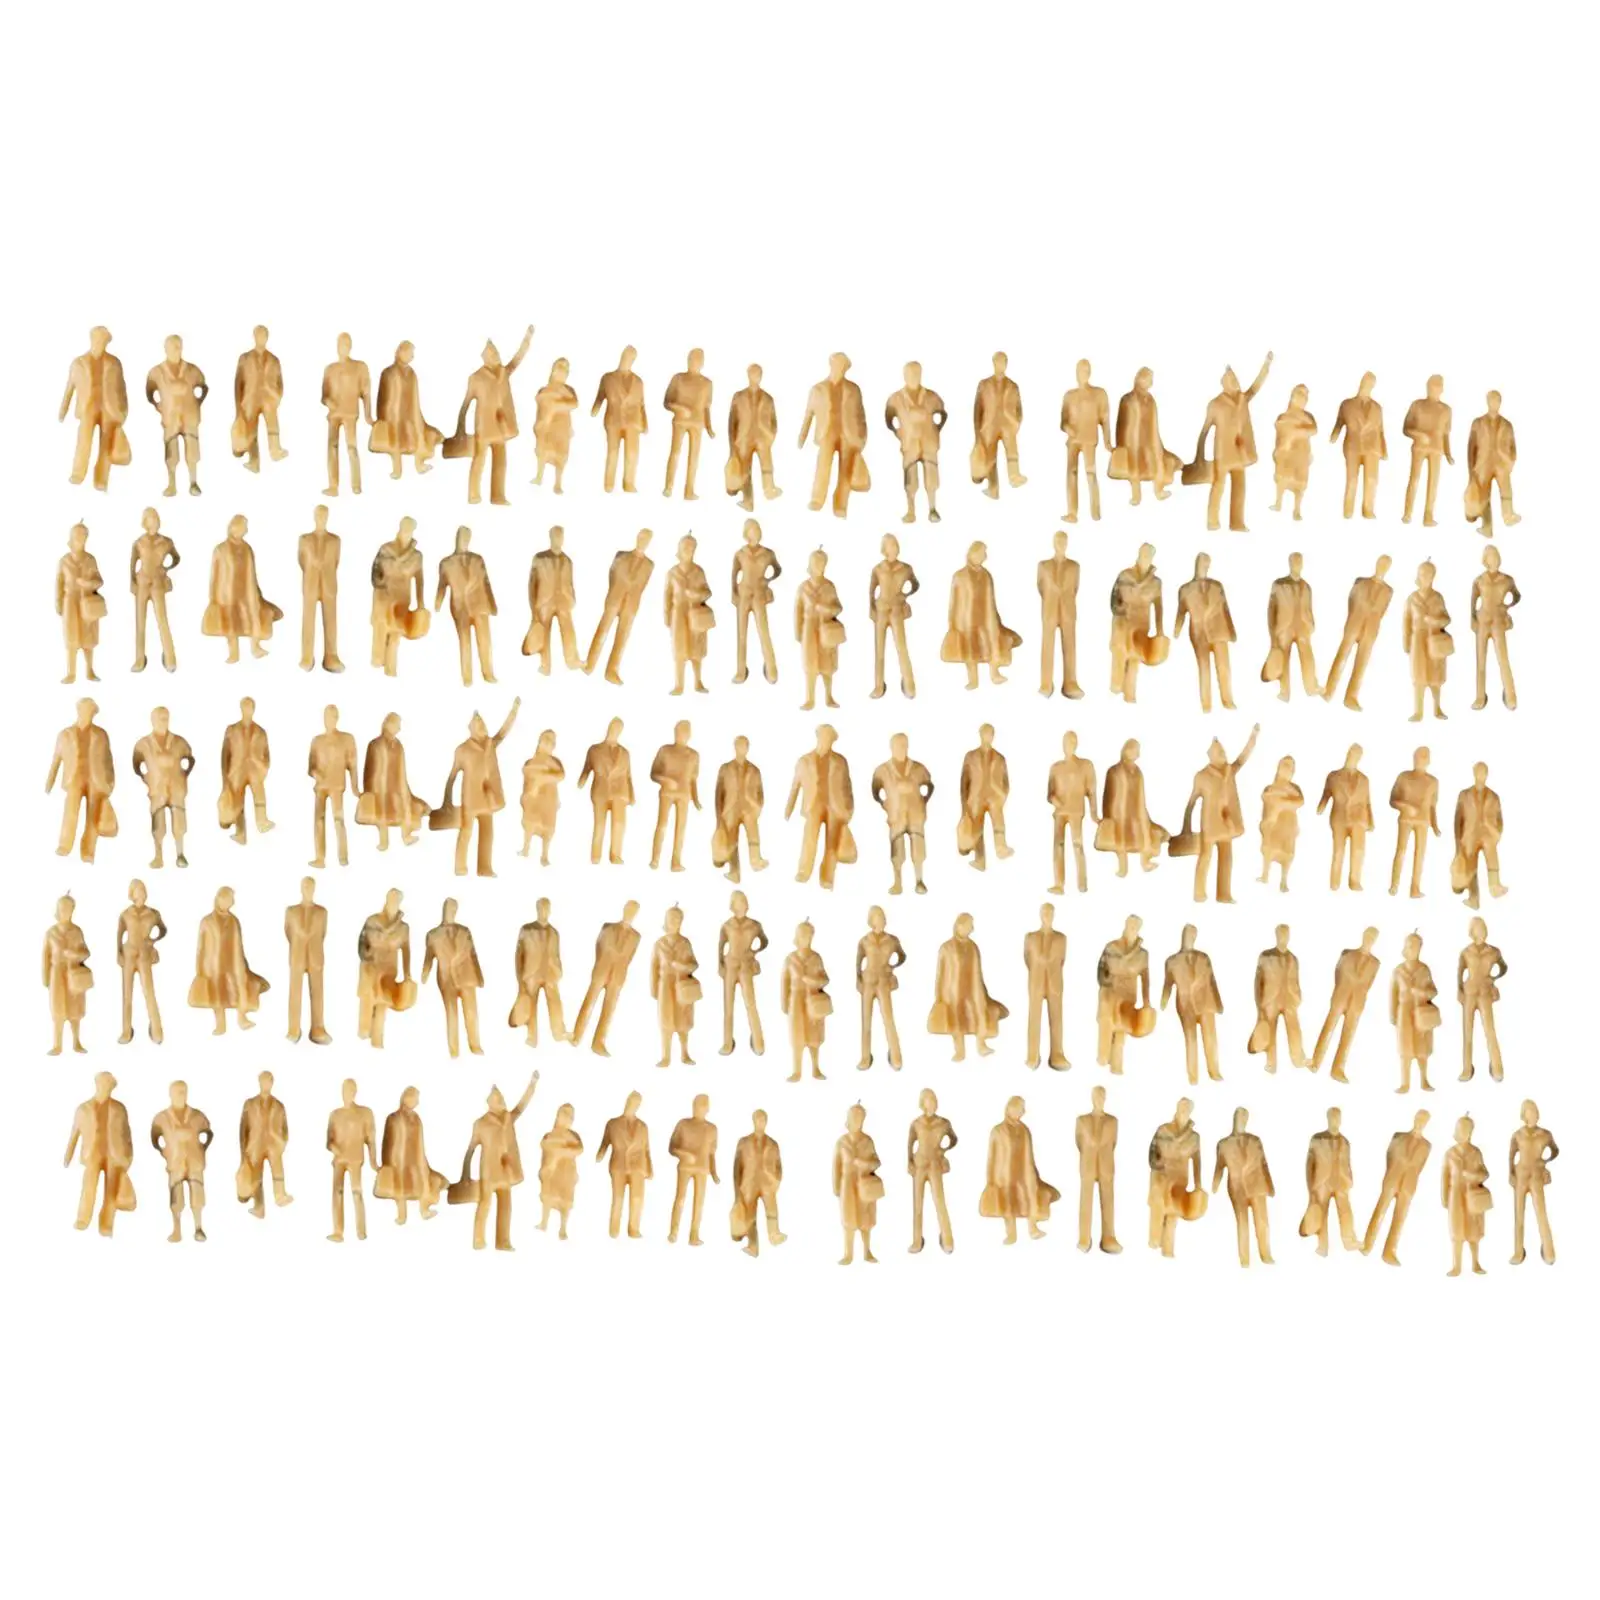 100 Pieces Simulated 1:87 Scale Model Figures Doll Miniature Scenes DIY Micro Landscapes Unpainted Tiny People Standing Ornament